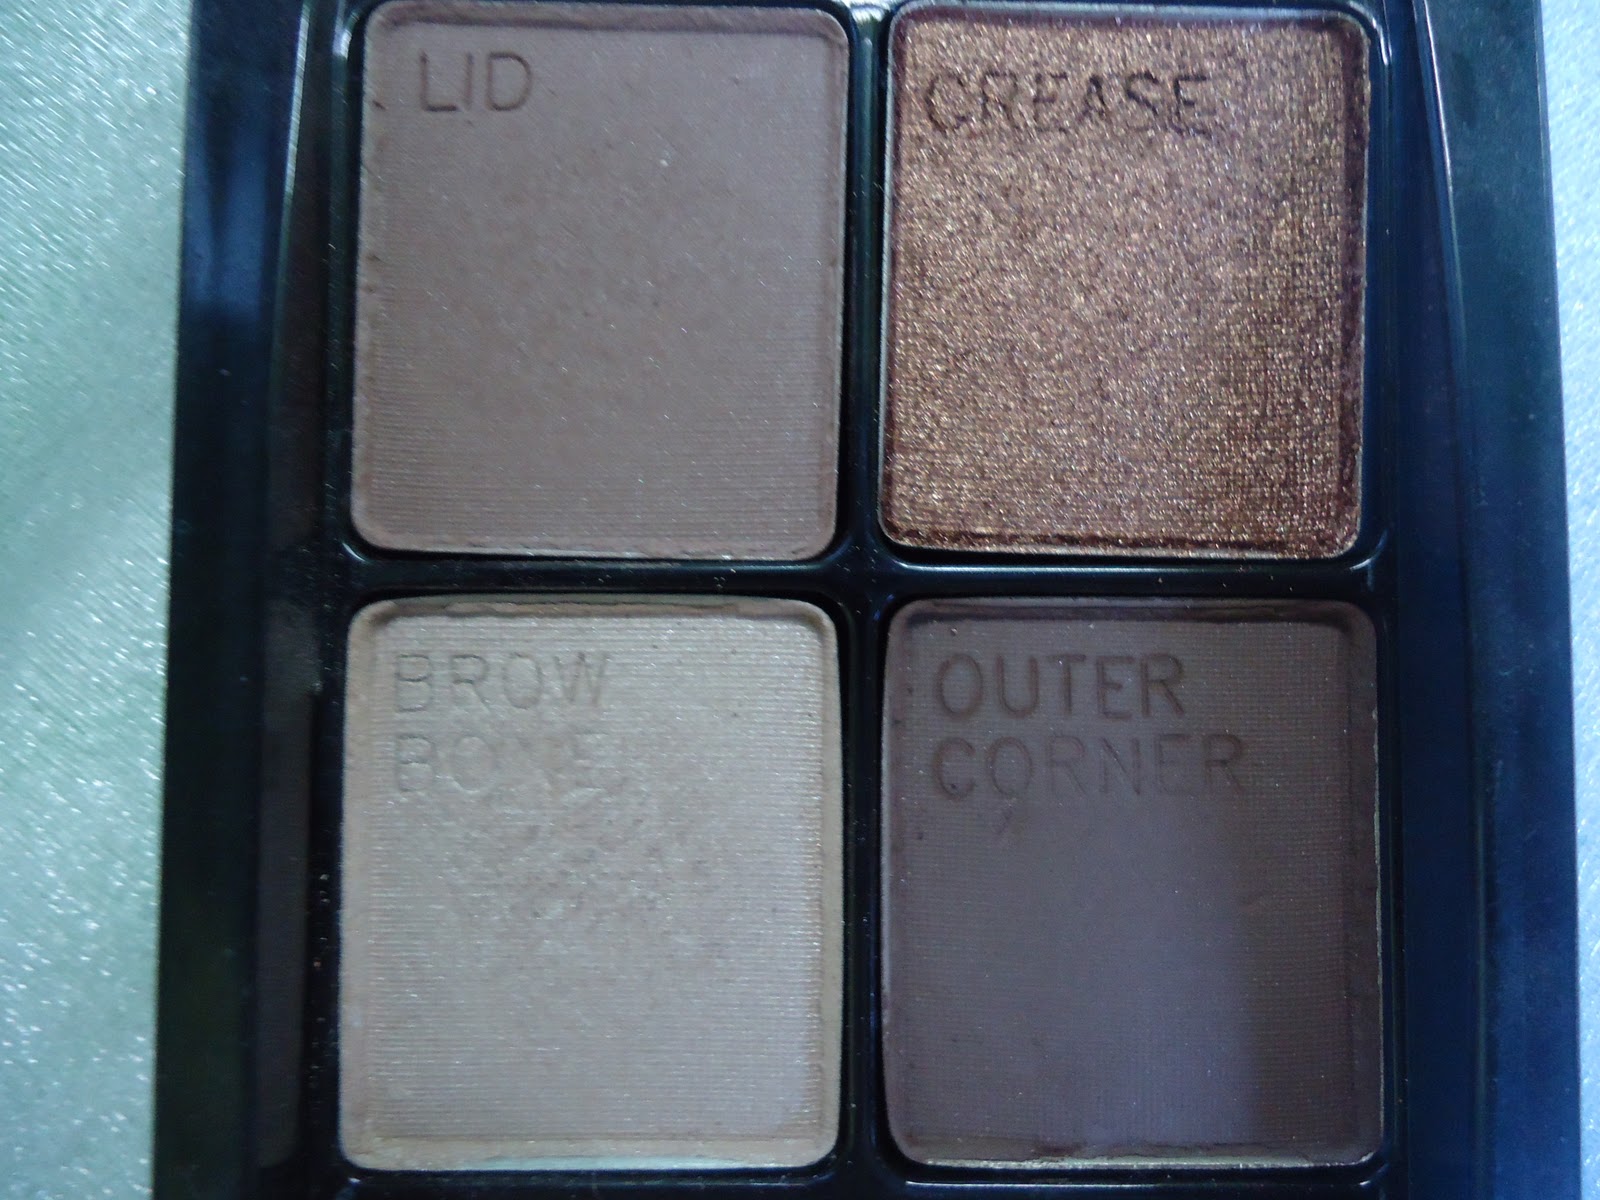 Maybelline Chai Latte Quad Review, Swatches - New Love - Makeup